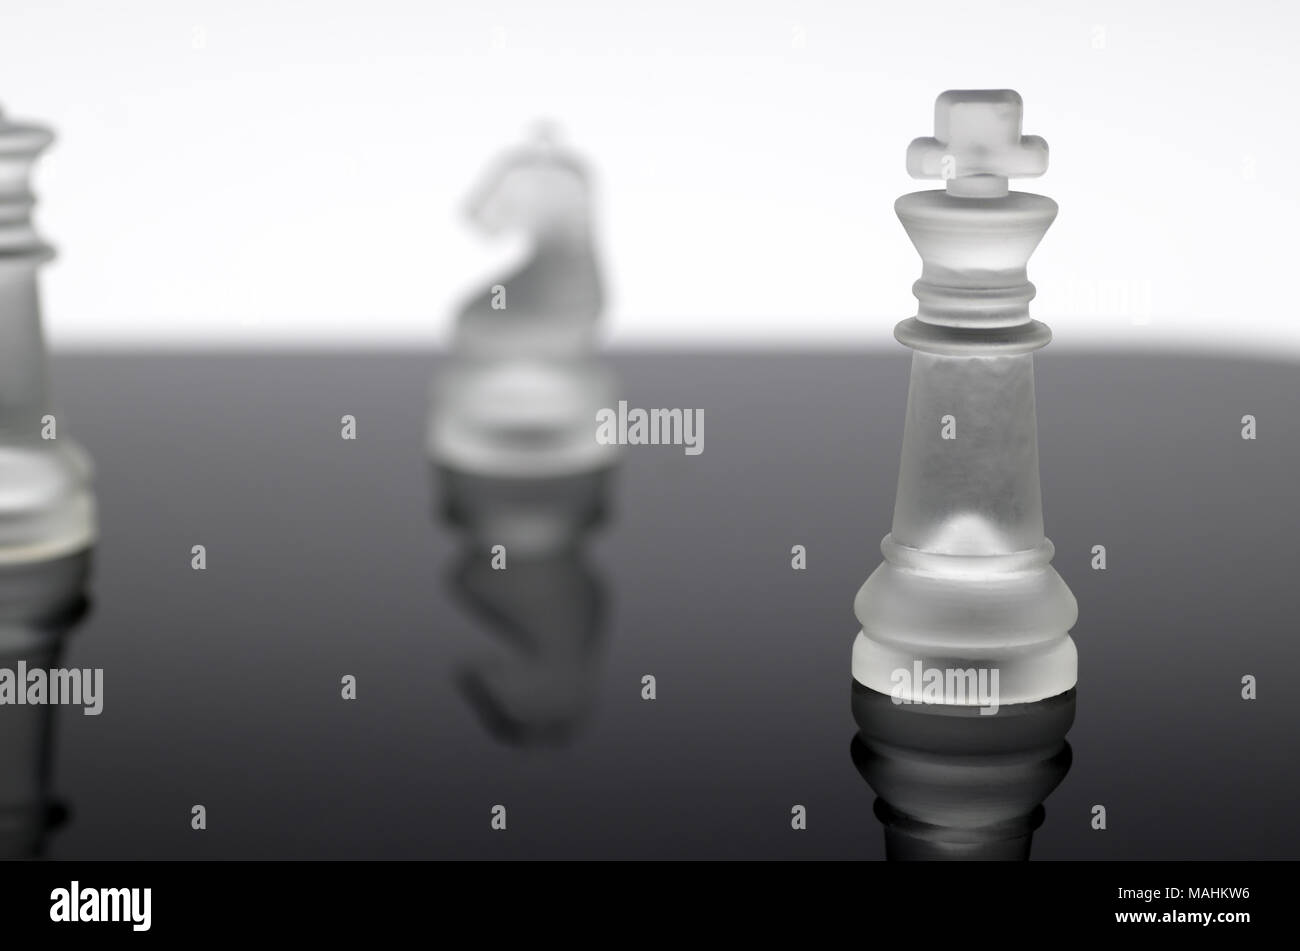 It is a chess piece, a translucent king that stands out among other pieces that are intentionally blurred out. Stock Photo